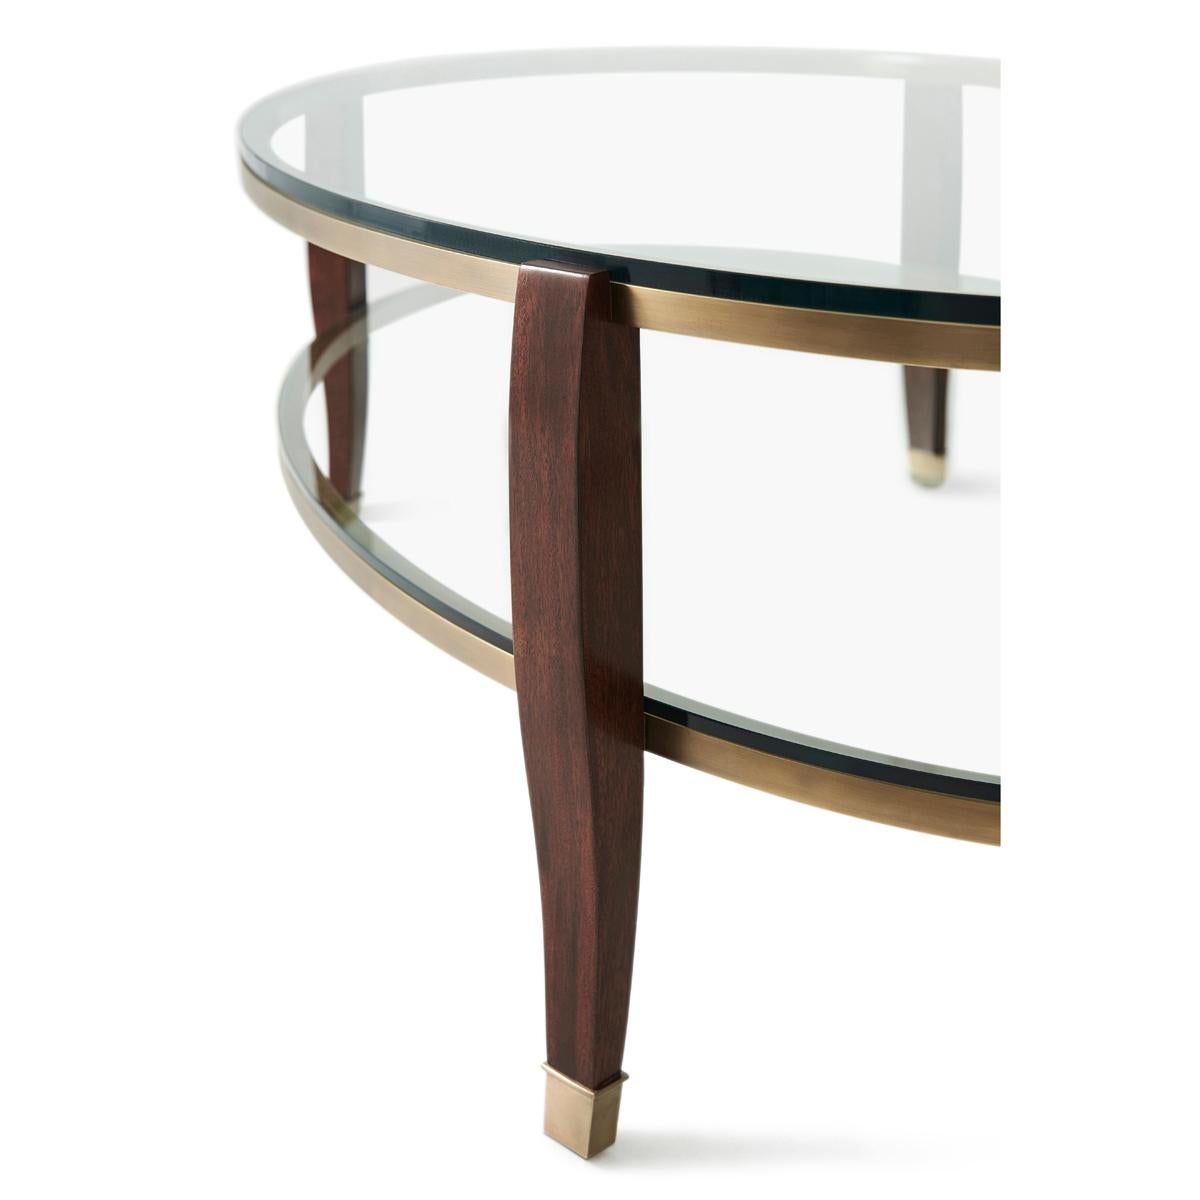 Vietnamese Art Deco Oval Coffee Table For Sale